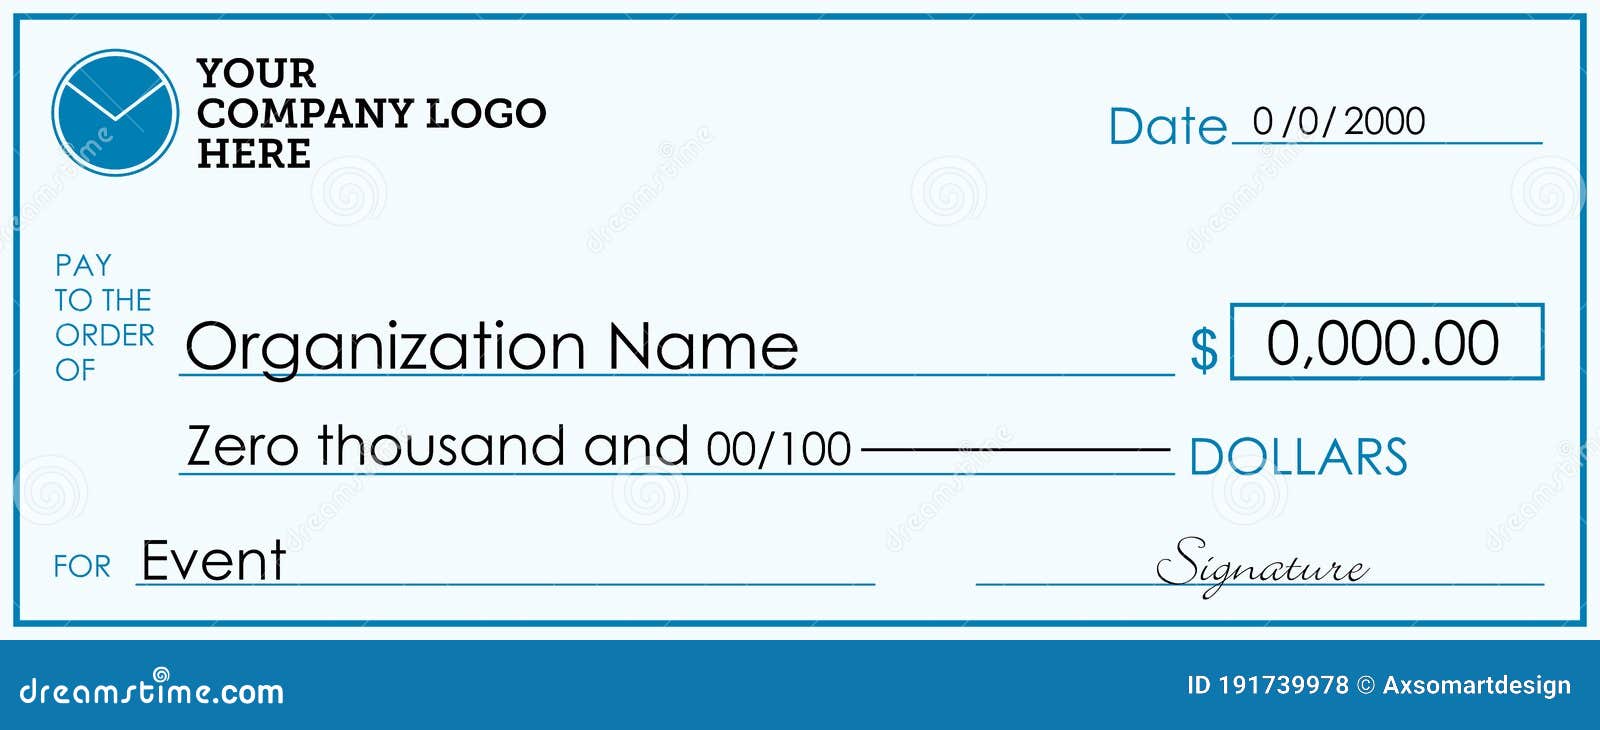 Large Presentation Check Template  Giant Check for Fundraisers In Presentation Check Template